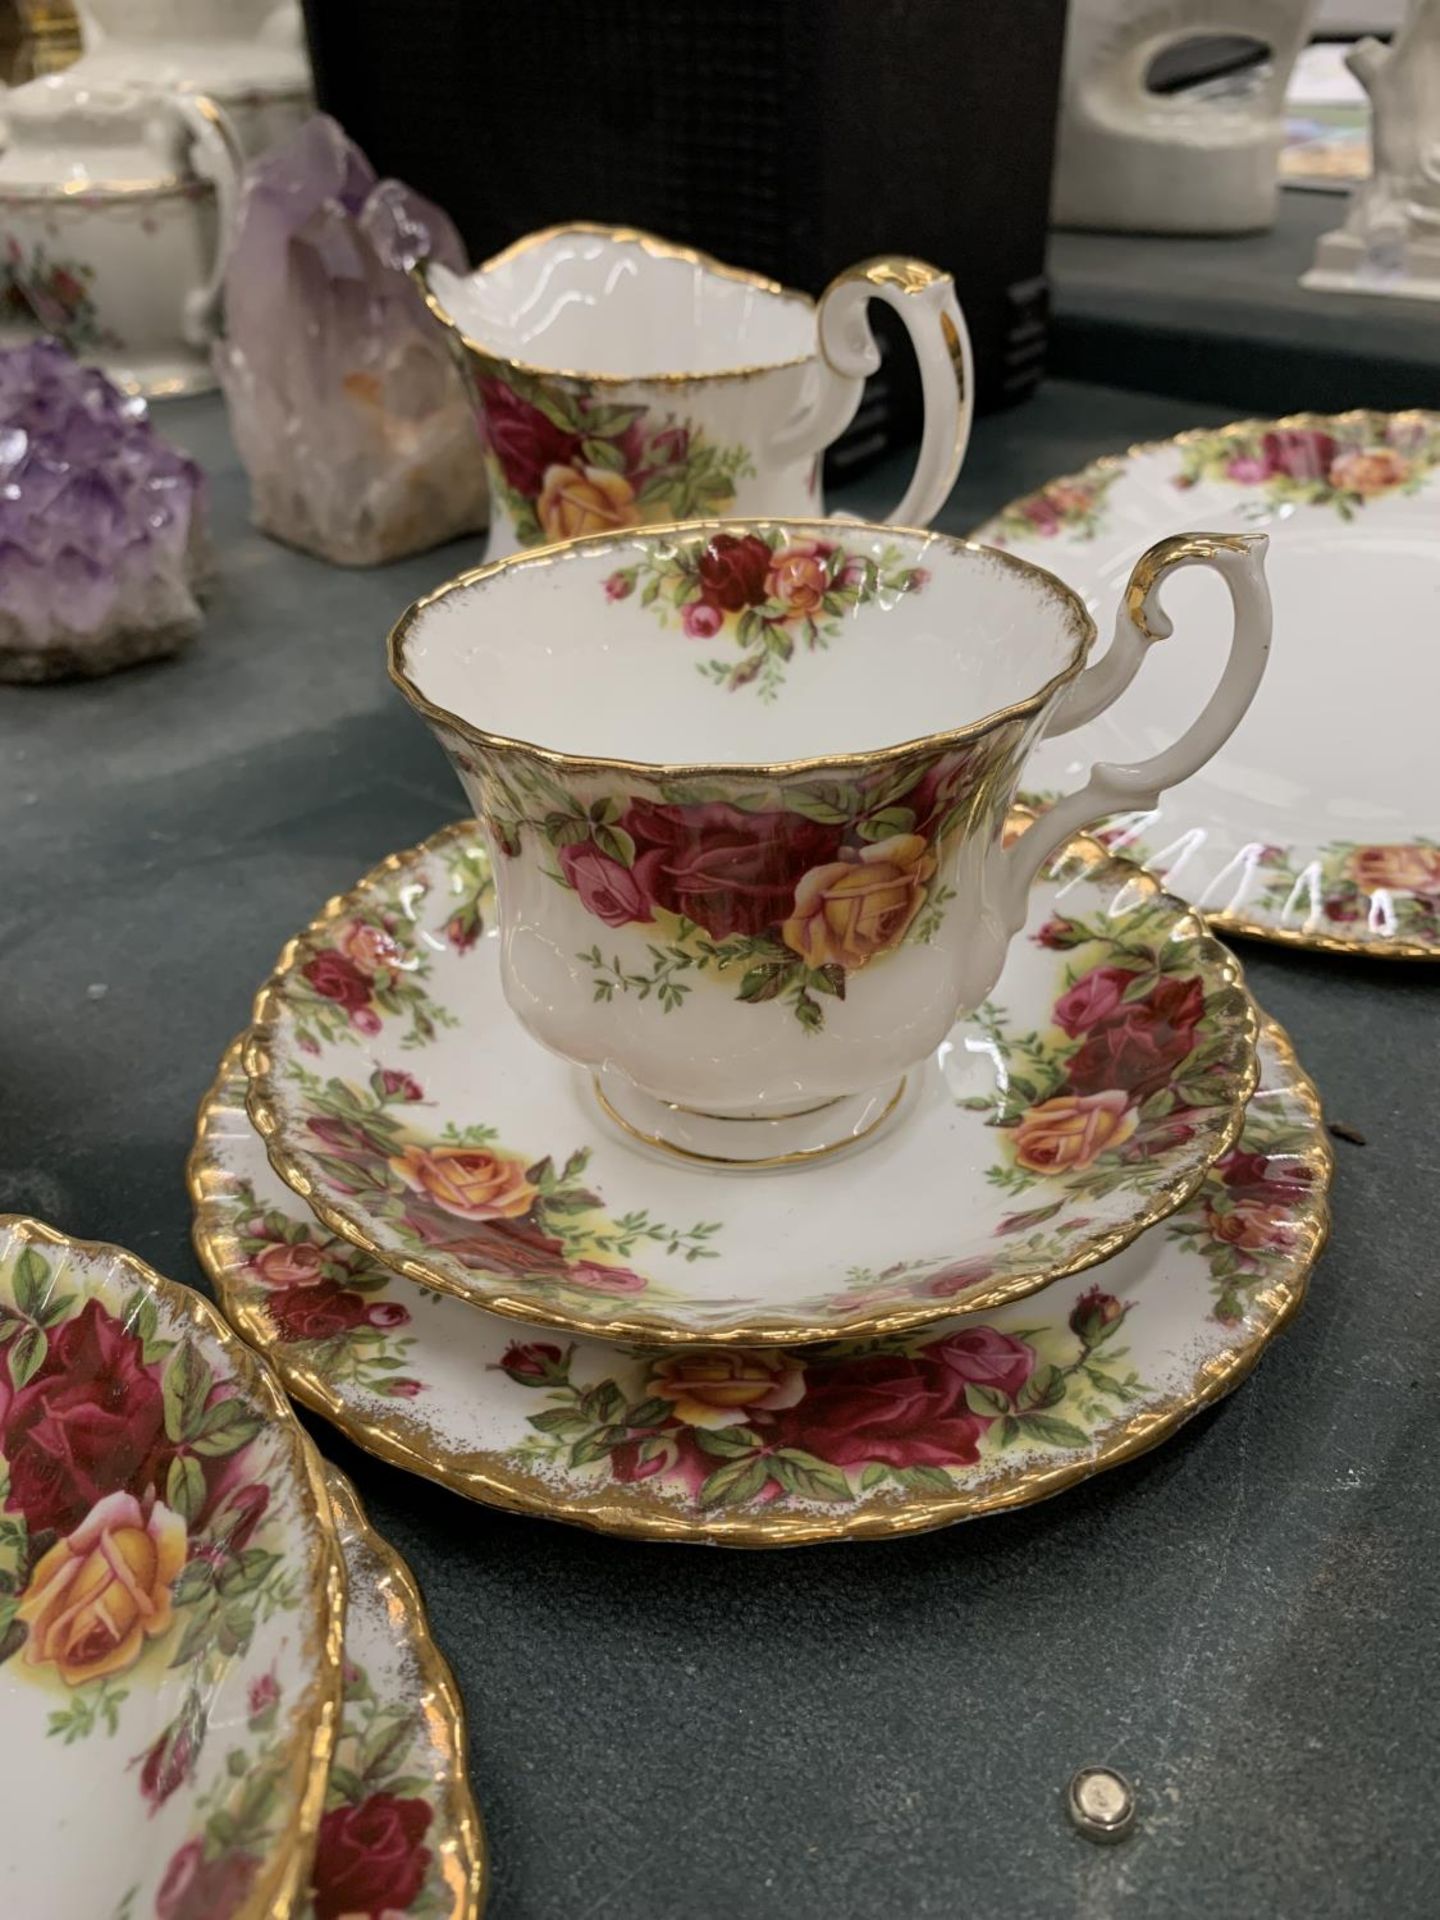 AQUANTITY OF ROYAL ALBERT 'OLD COUNTRY ROSES' TO INCLUDE CUPS, SAUCERS, PLATES, CREAM JUG, SUGAR - Image 3 of 4